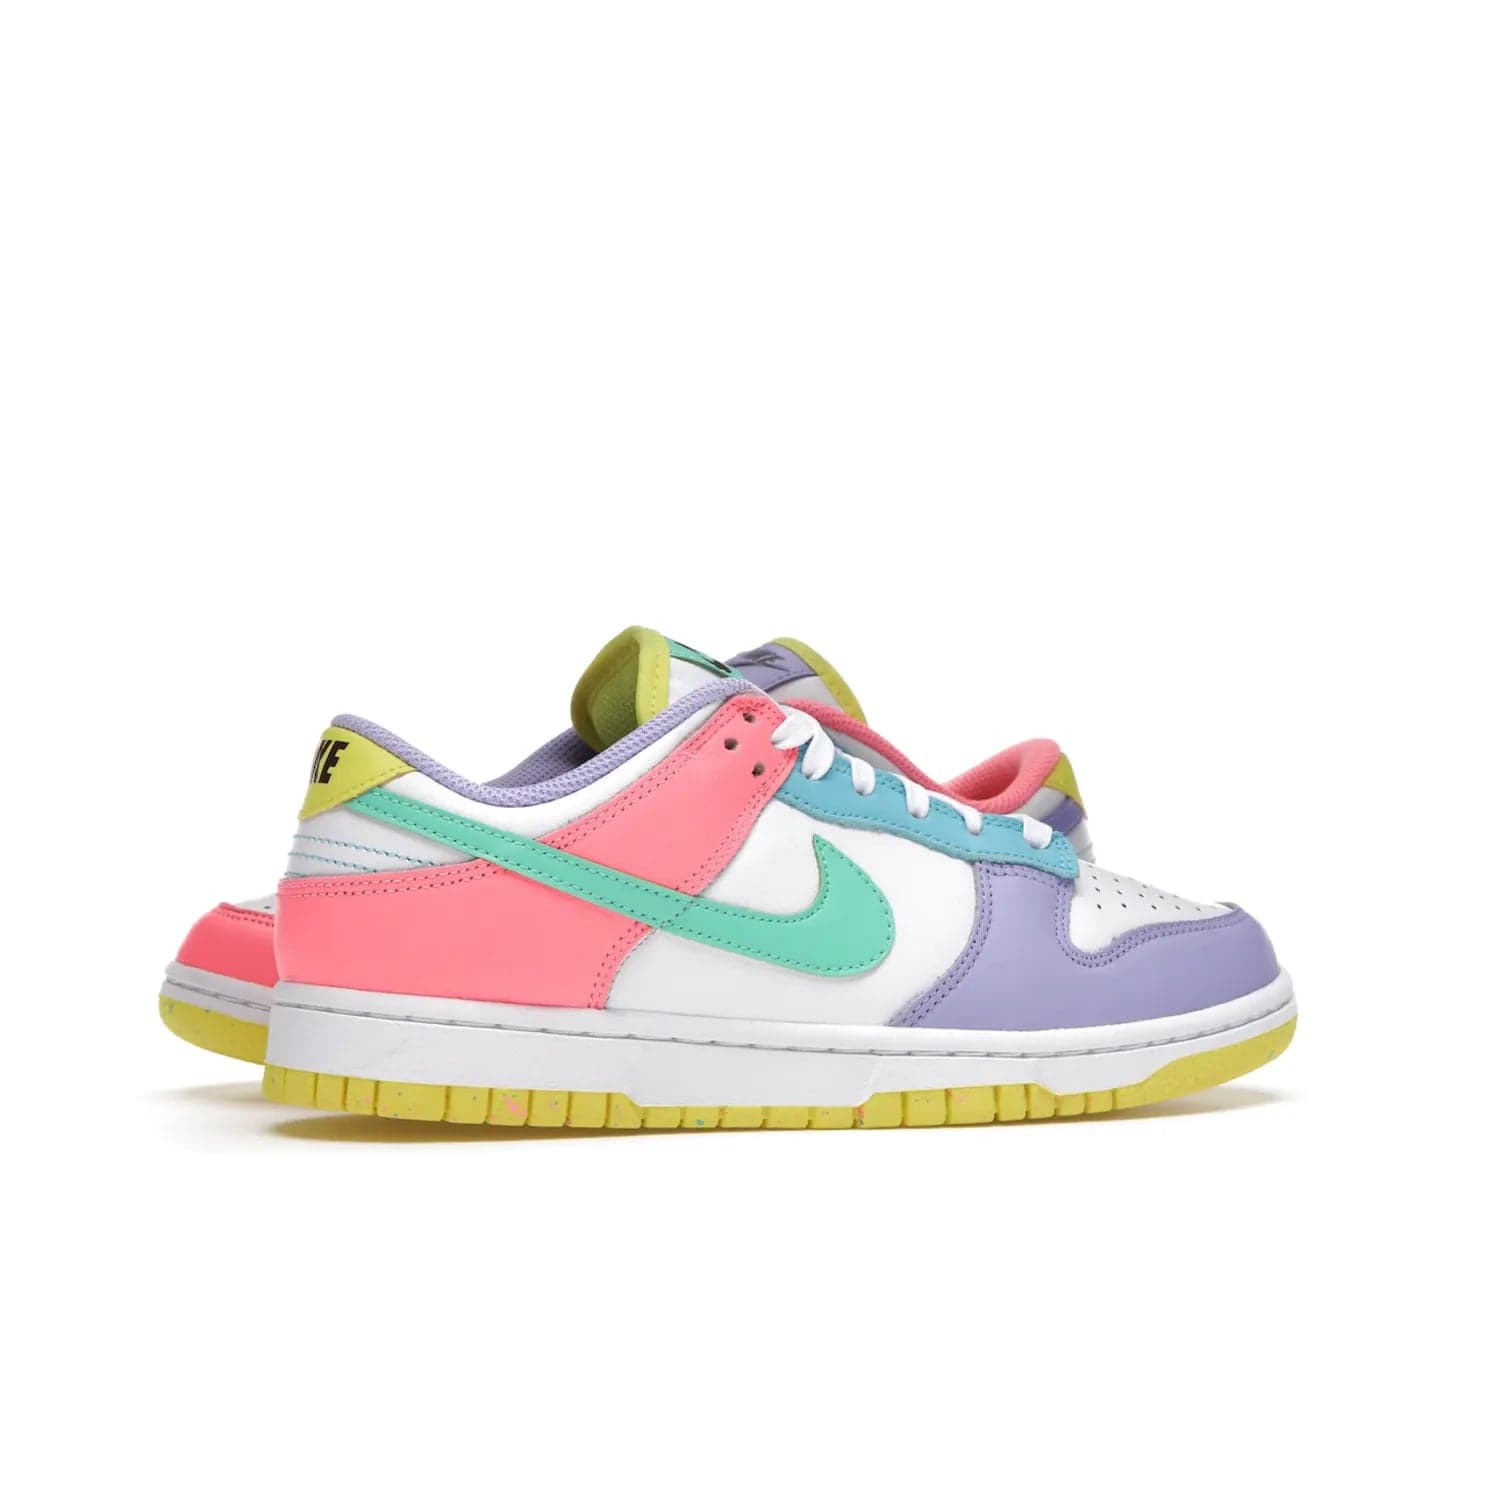 Nike Dunk Low SE Easter Candy (Women's) - Image 35 - Only at www.BallersClubKickz.com - UP
The Nike Dunk Low SE Easter Candy (Women's) brings a stylish touch to any outfit with its white leather upper, colorful accents, and multicolor speckle detailing. Shop now before they're gone.